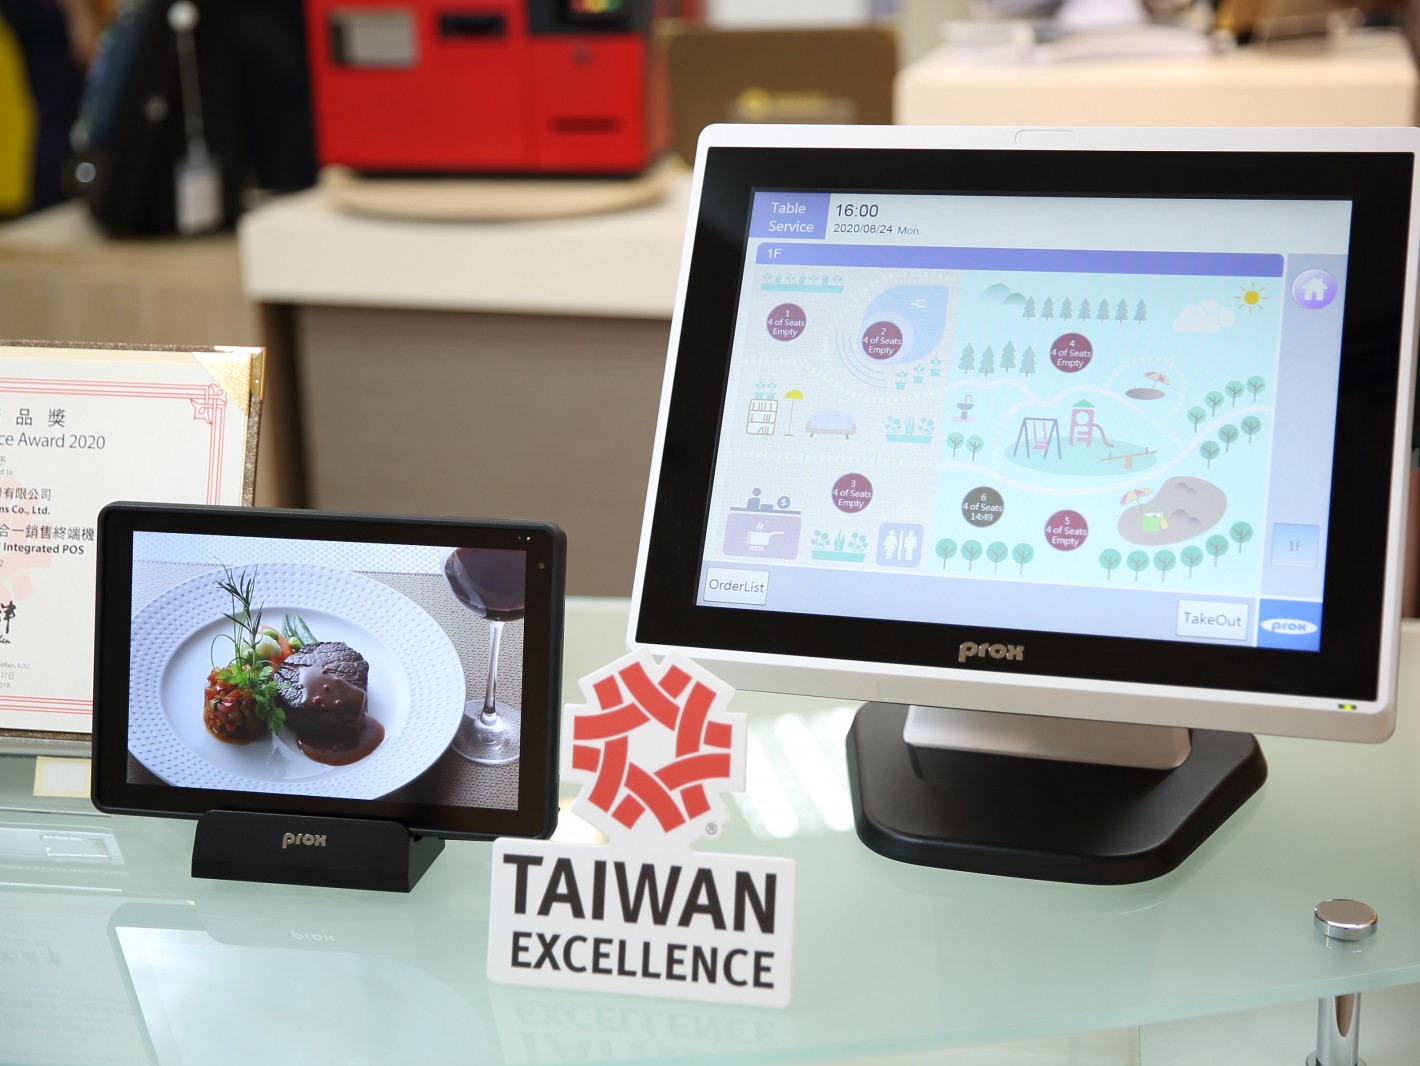 Protech Systems Co., Ltd. is a frequent winner of the Taiwan Excellence Award, and it has been awarded the Taiwan Excellence Achievement Award for winning over 60 Taiwan Excellence Awards in the past.